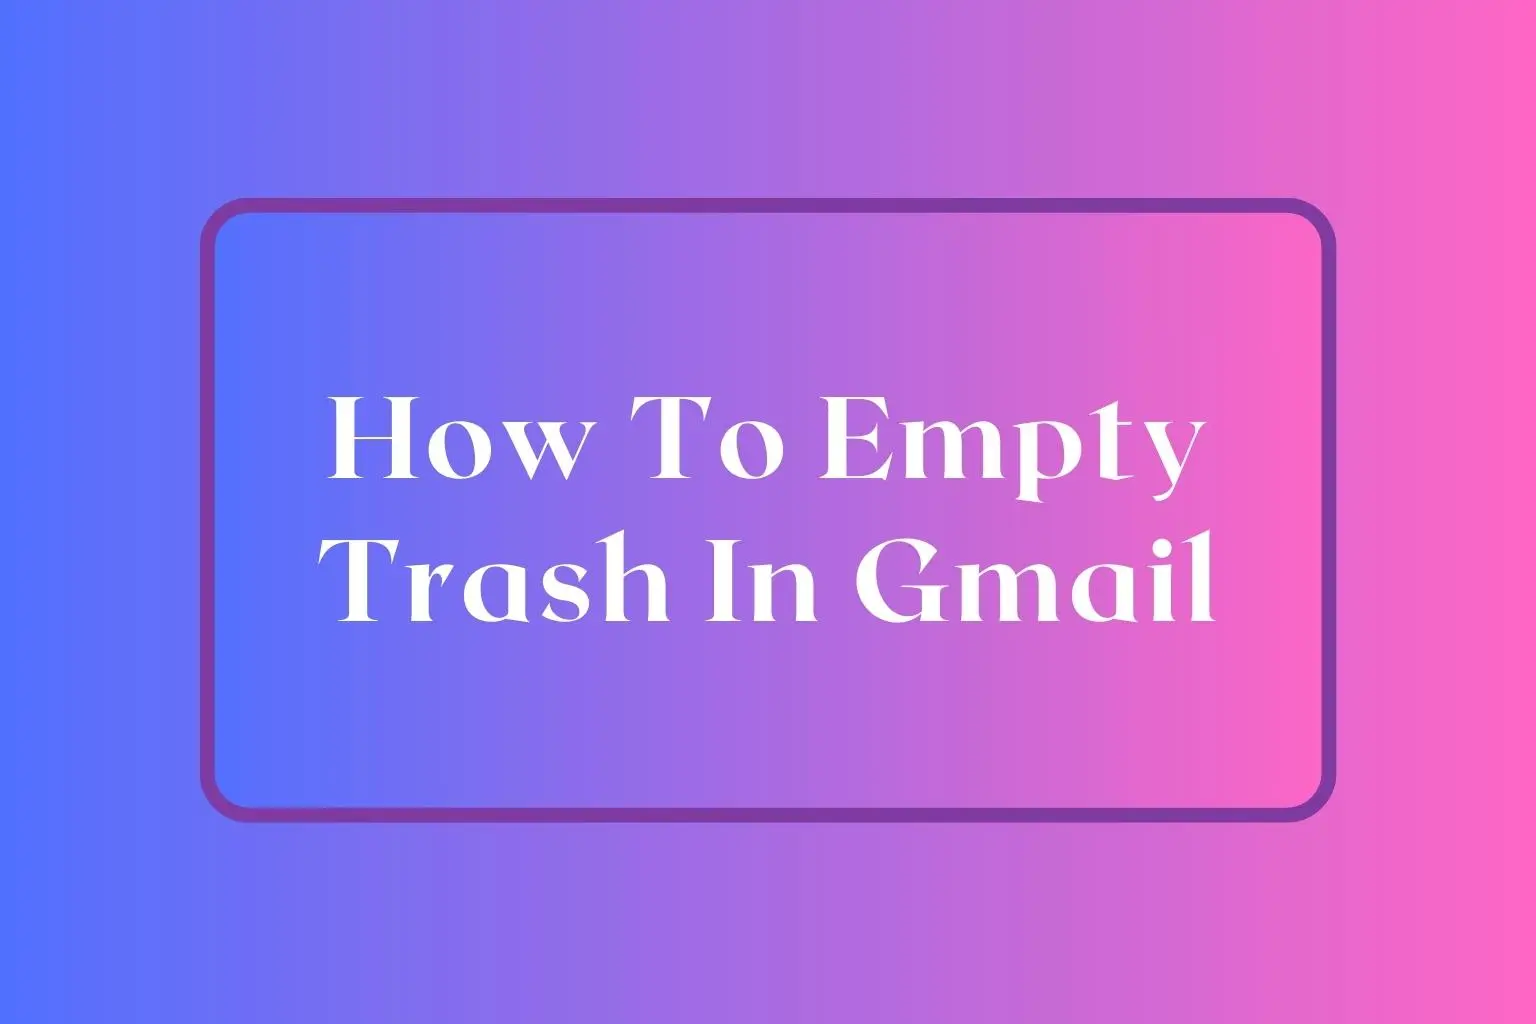 How To Empty Trash In Gmail